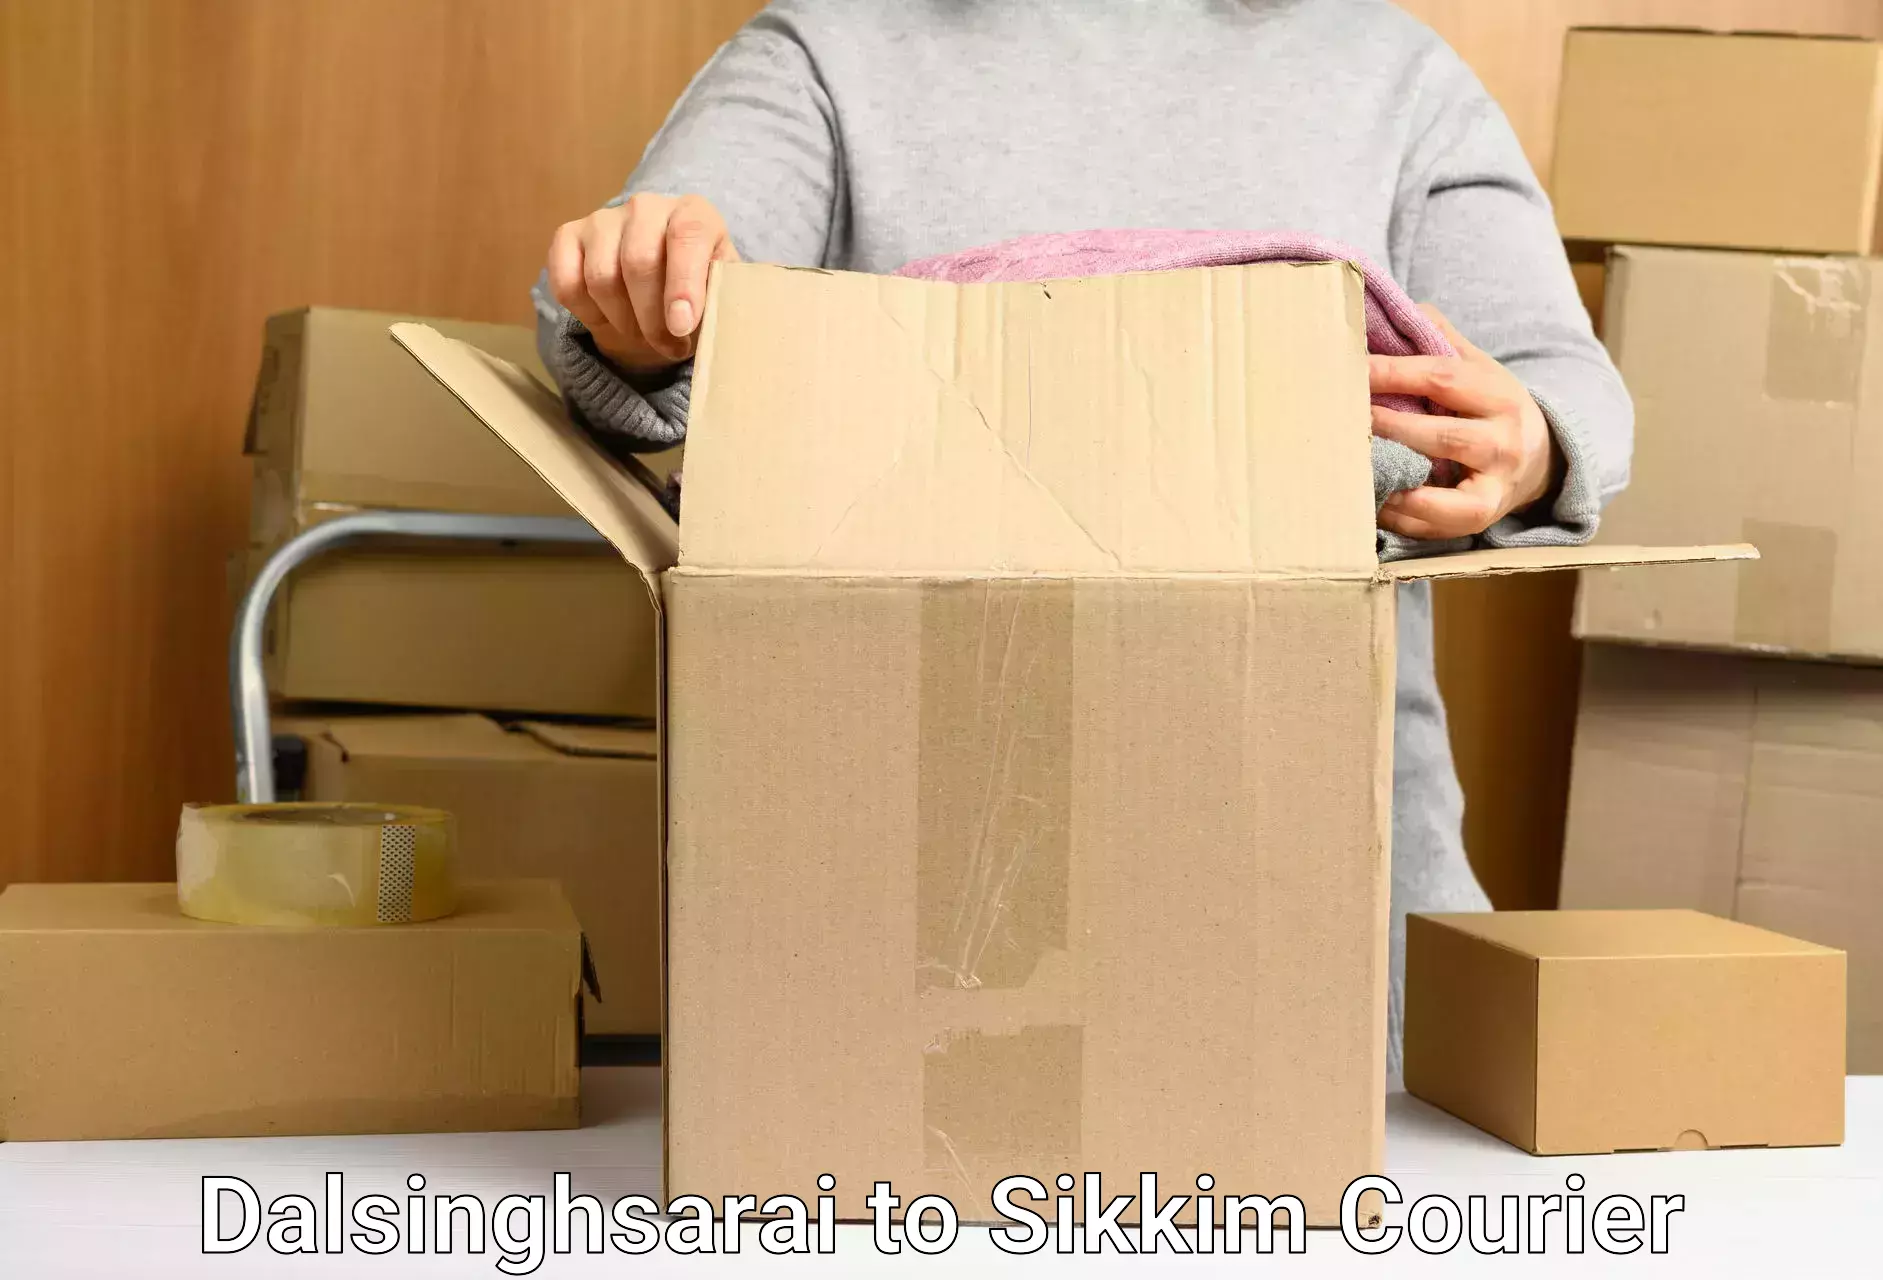 Easy access courier services Dalsinghsarai to South Sikkim